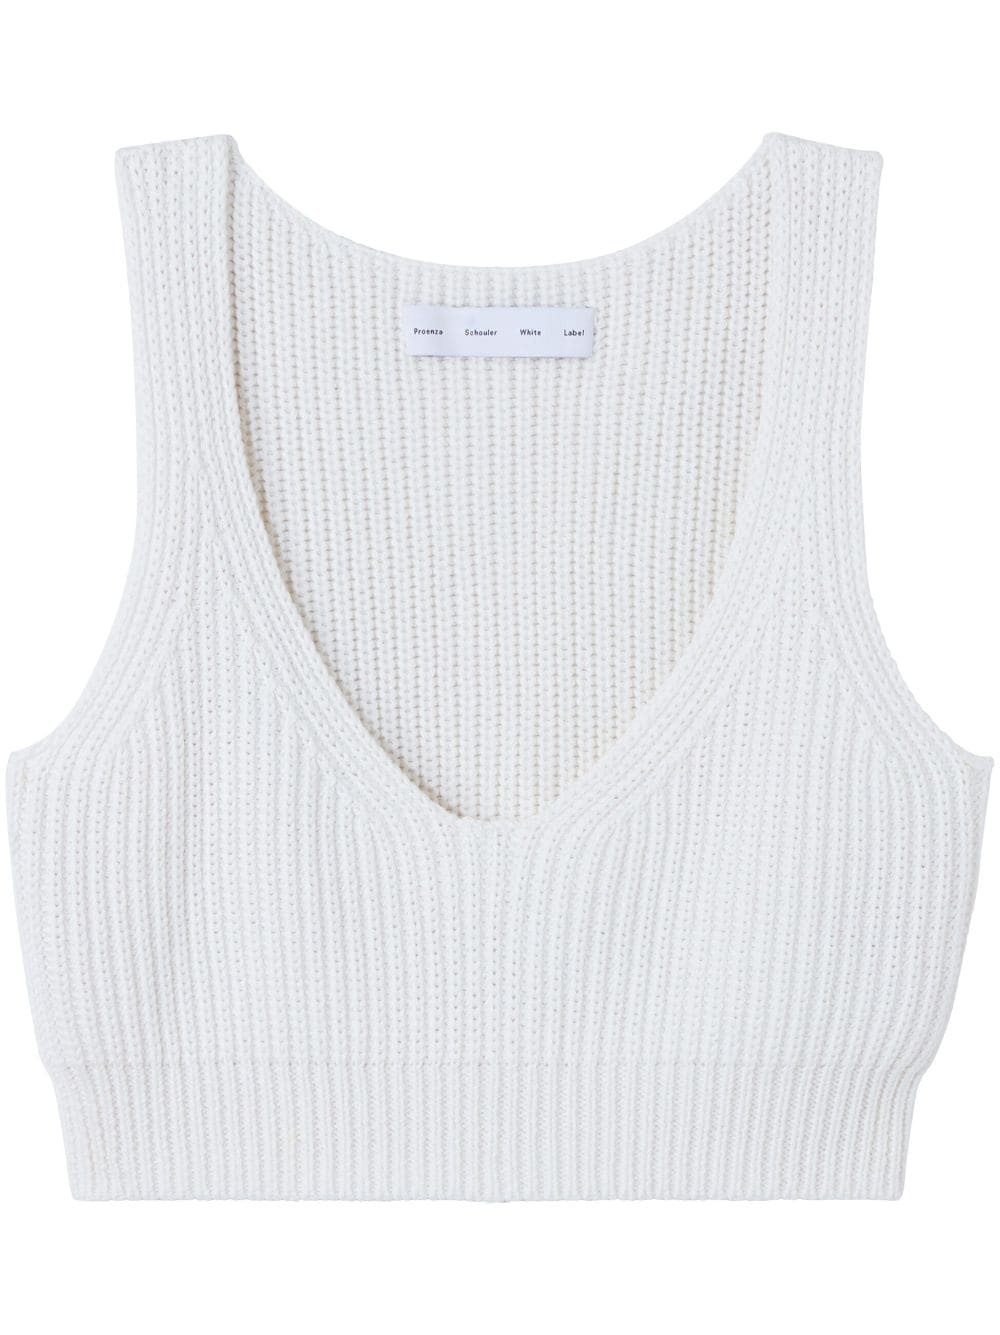 ribbed-knit cotton top - 1